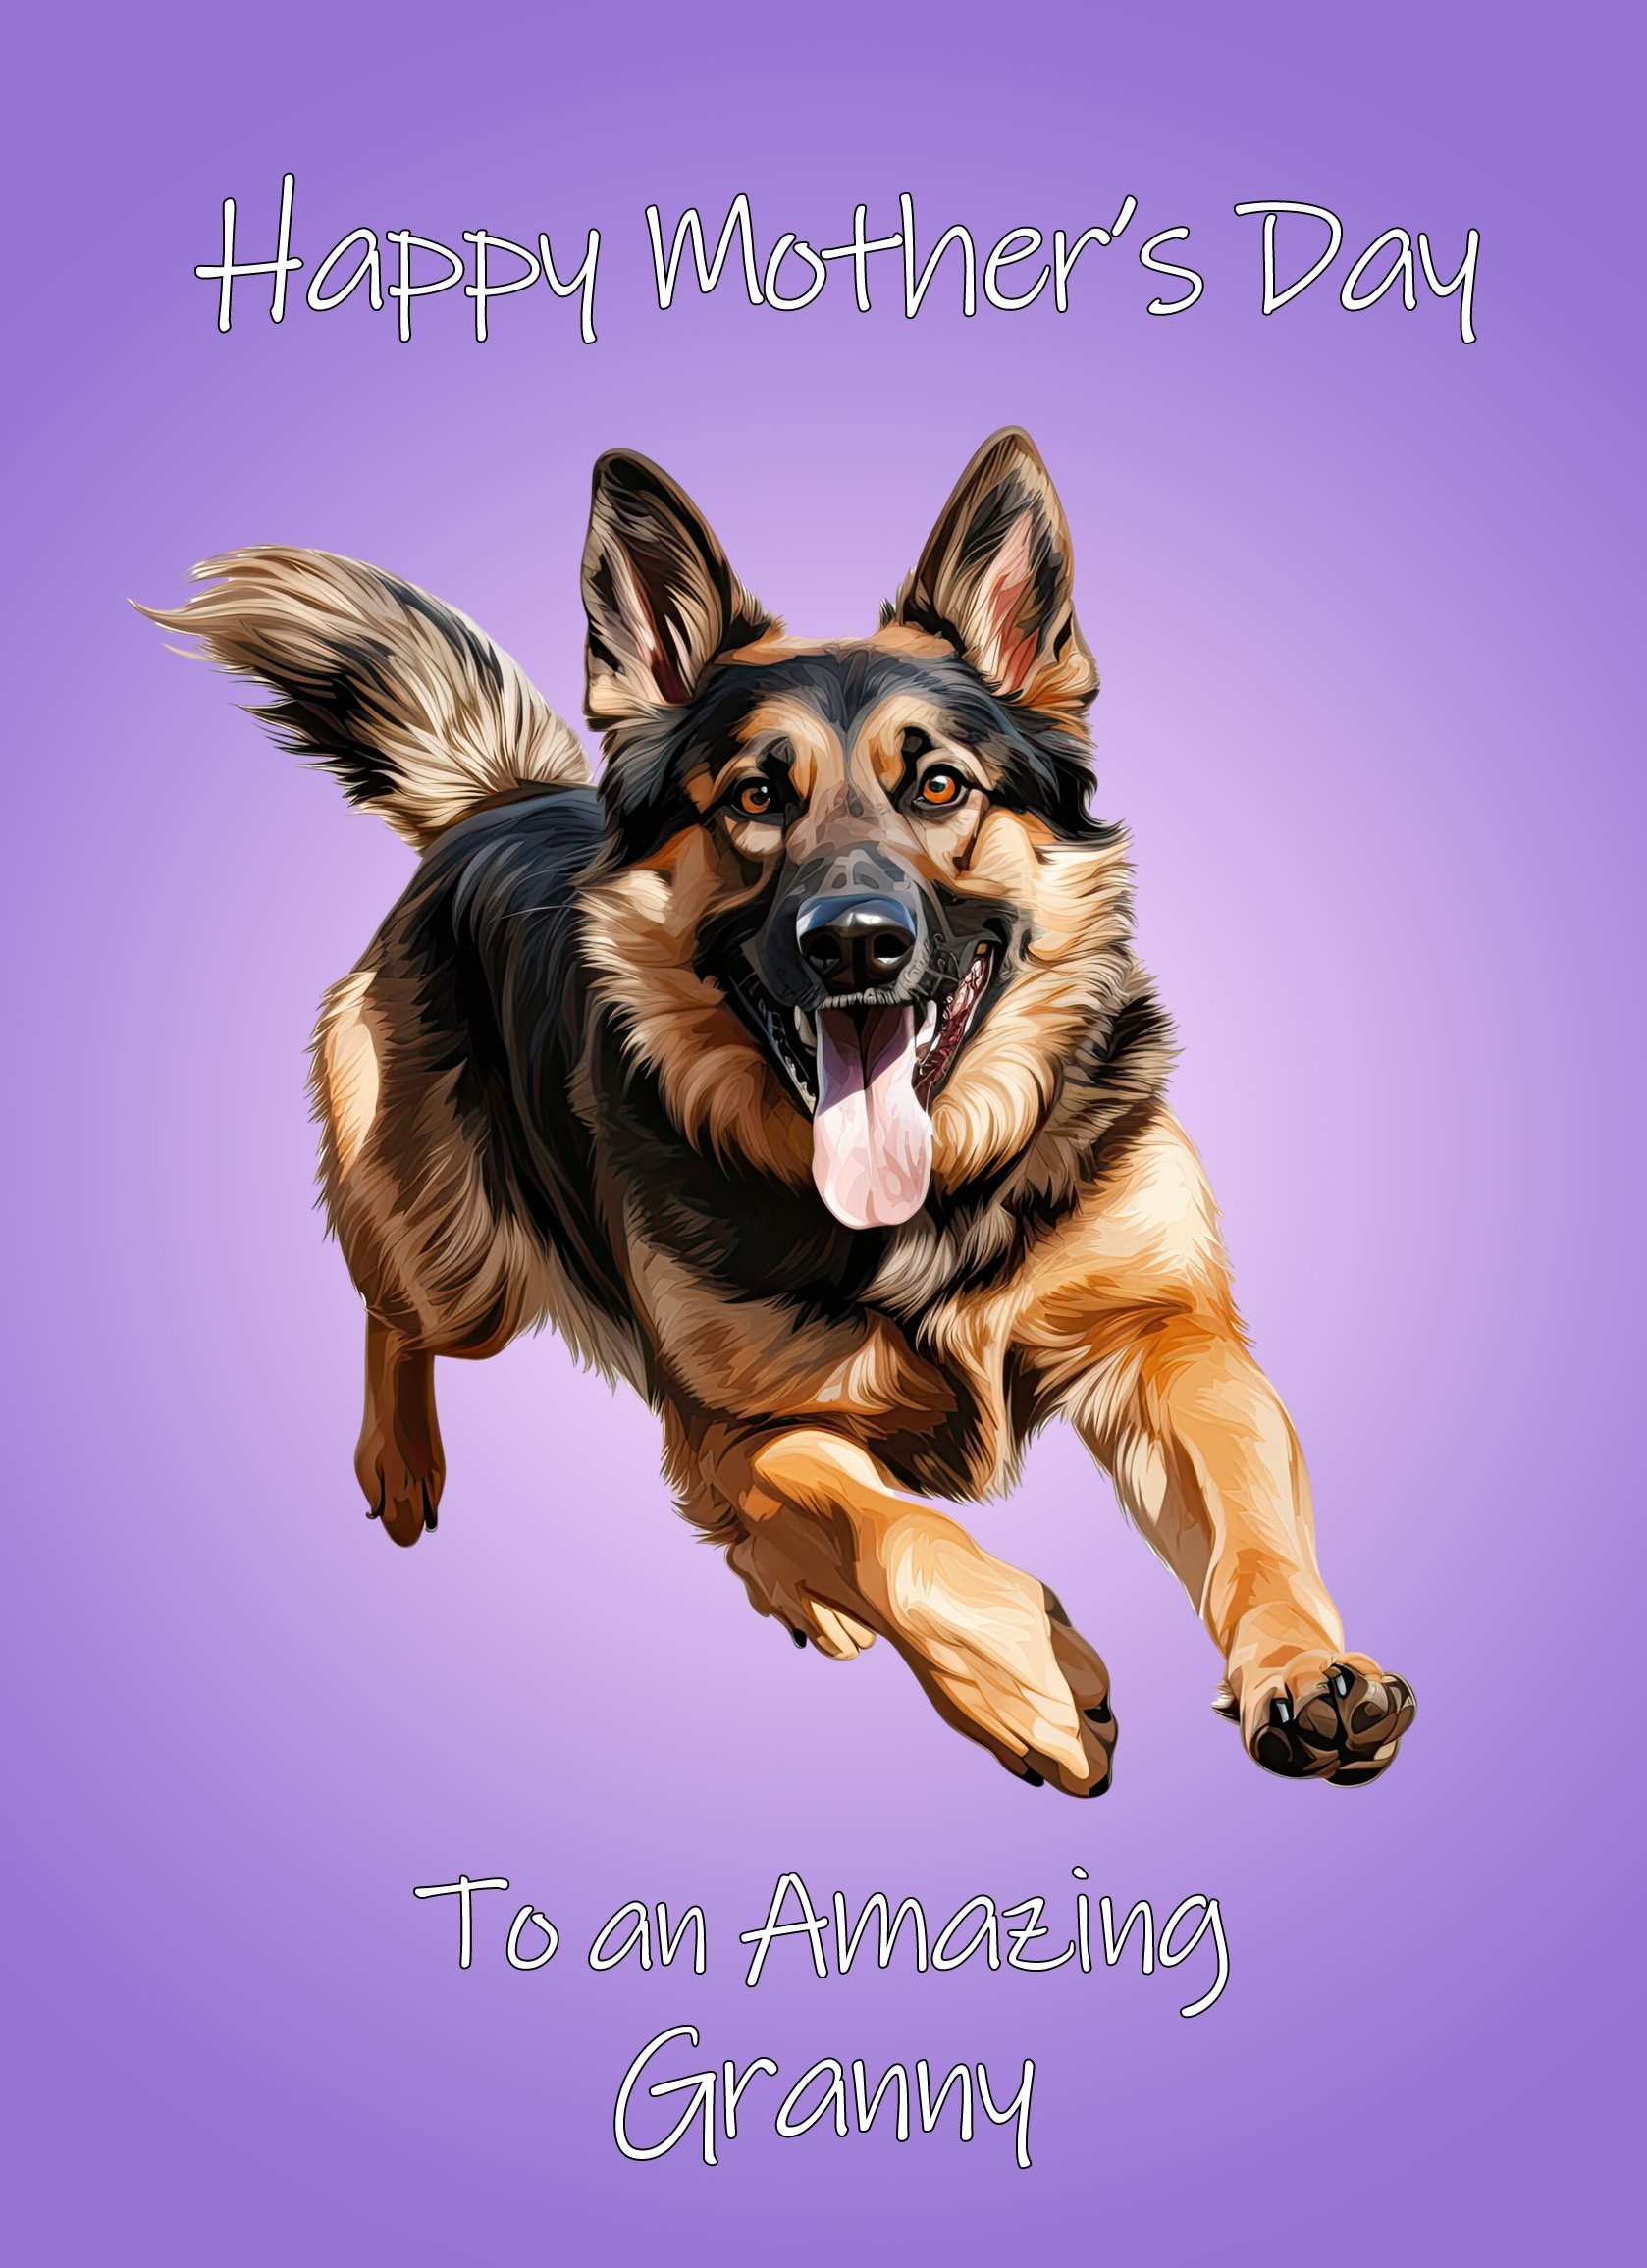 German Shepherd Dog Mothers Day Card For Granny